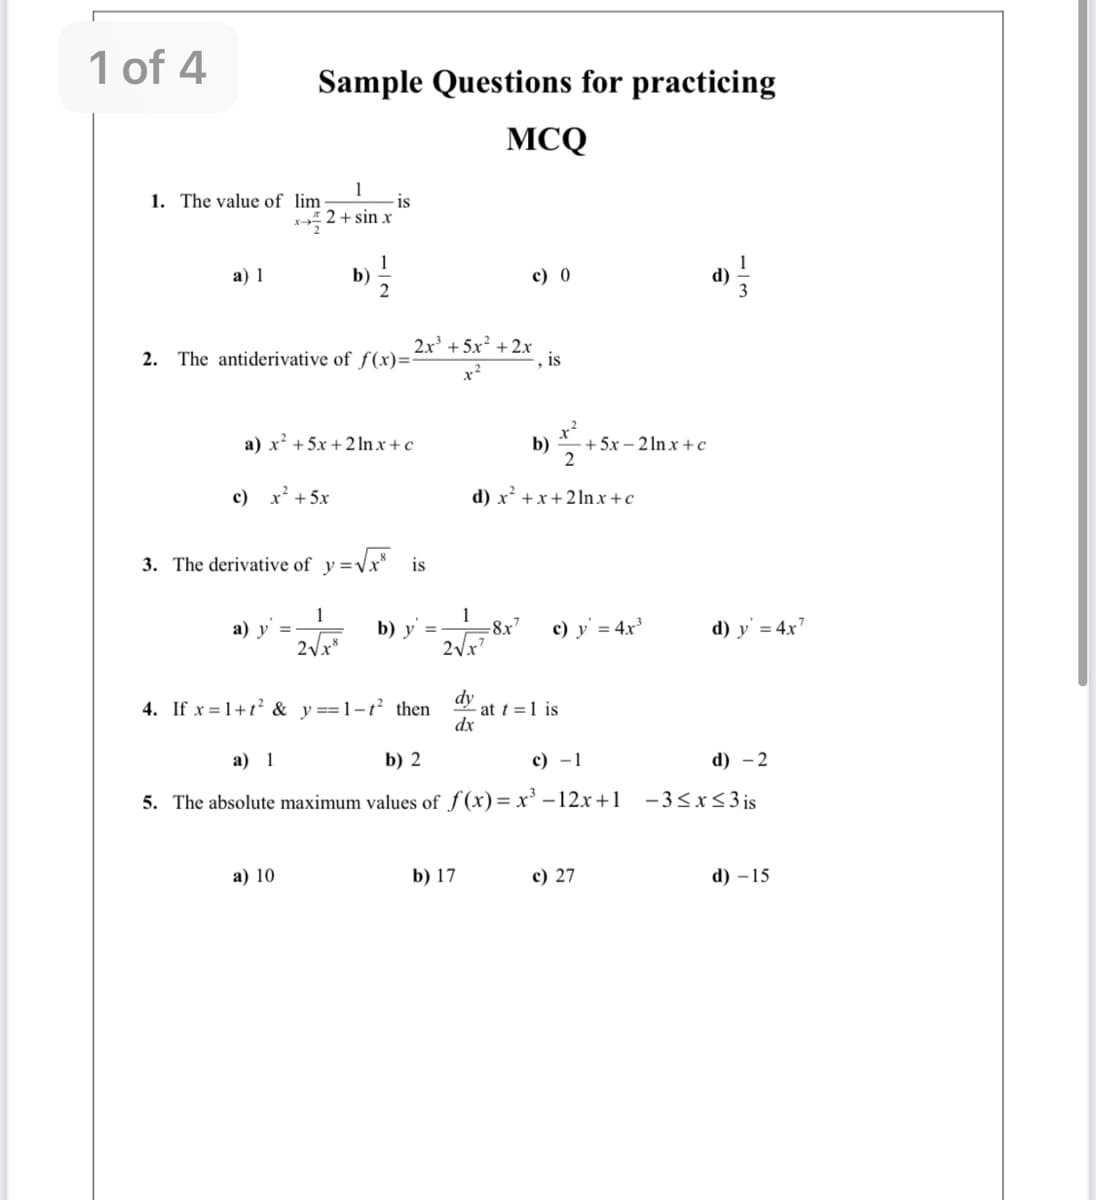 1 of 4
Sample Questions for practicing
MCQ
1
-is
2 + sin x
1. The value of lim
а) 1
b)
c) 0
1
d)
2x +5:
2. The antiderivative of f(x)=:
is
x?
a) x? +5x + 21In x + c
b)
+ 5x – 2 In x +c
2
c) x' +5x
d) x² +x+ 2 lnx +c
3. The derivative of y =Vx is
а) у
1
b) y
1
-8x7
c) y' = 4x'
d) y' = 4x'
2Vx
2Vx
dy
- at t =1 is
dx
4. If x = 1+t? & y==1-t² then
а) 1
b) 2
с) —1
d) - 2
5. The absolute maximum values of f(x)= x' –12x+1 -3<x<3 is
а) 10
b) 17
c) 27
d) – 15
